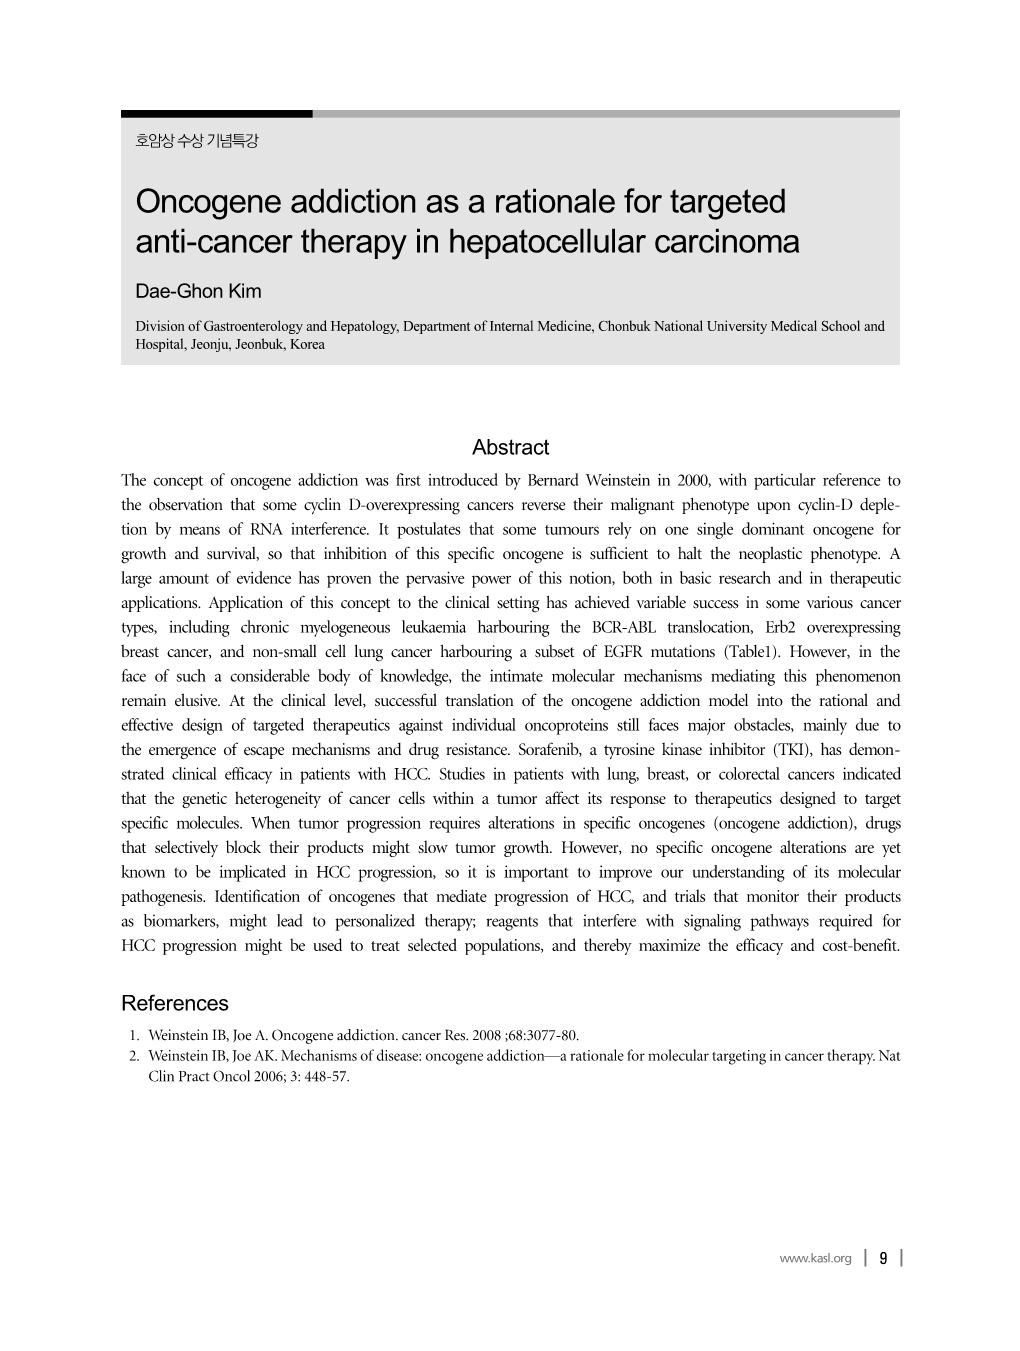 Oncogene Addiction As a Rationale for Targeted Anti-Cancer Therapy in Hepatocellular Carcinoma